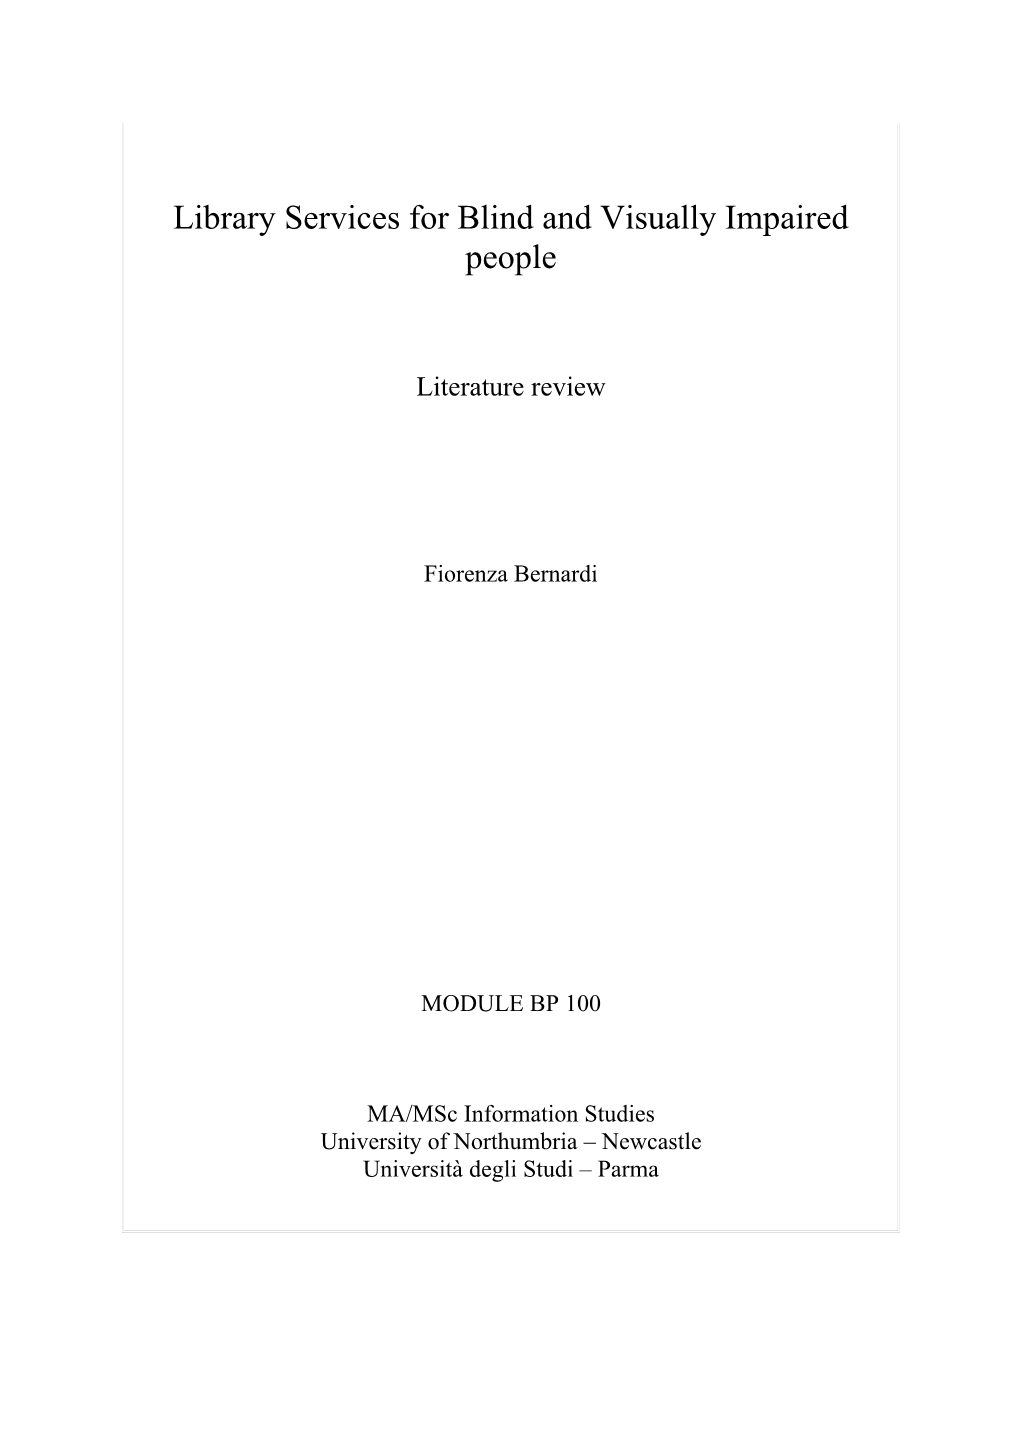 Library Services for Blind and Visually Impaired People